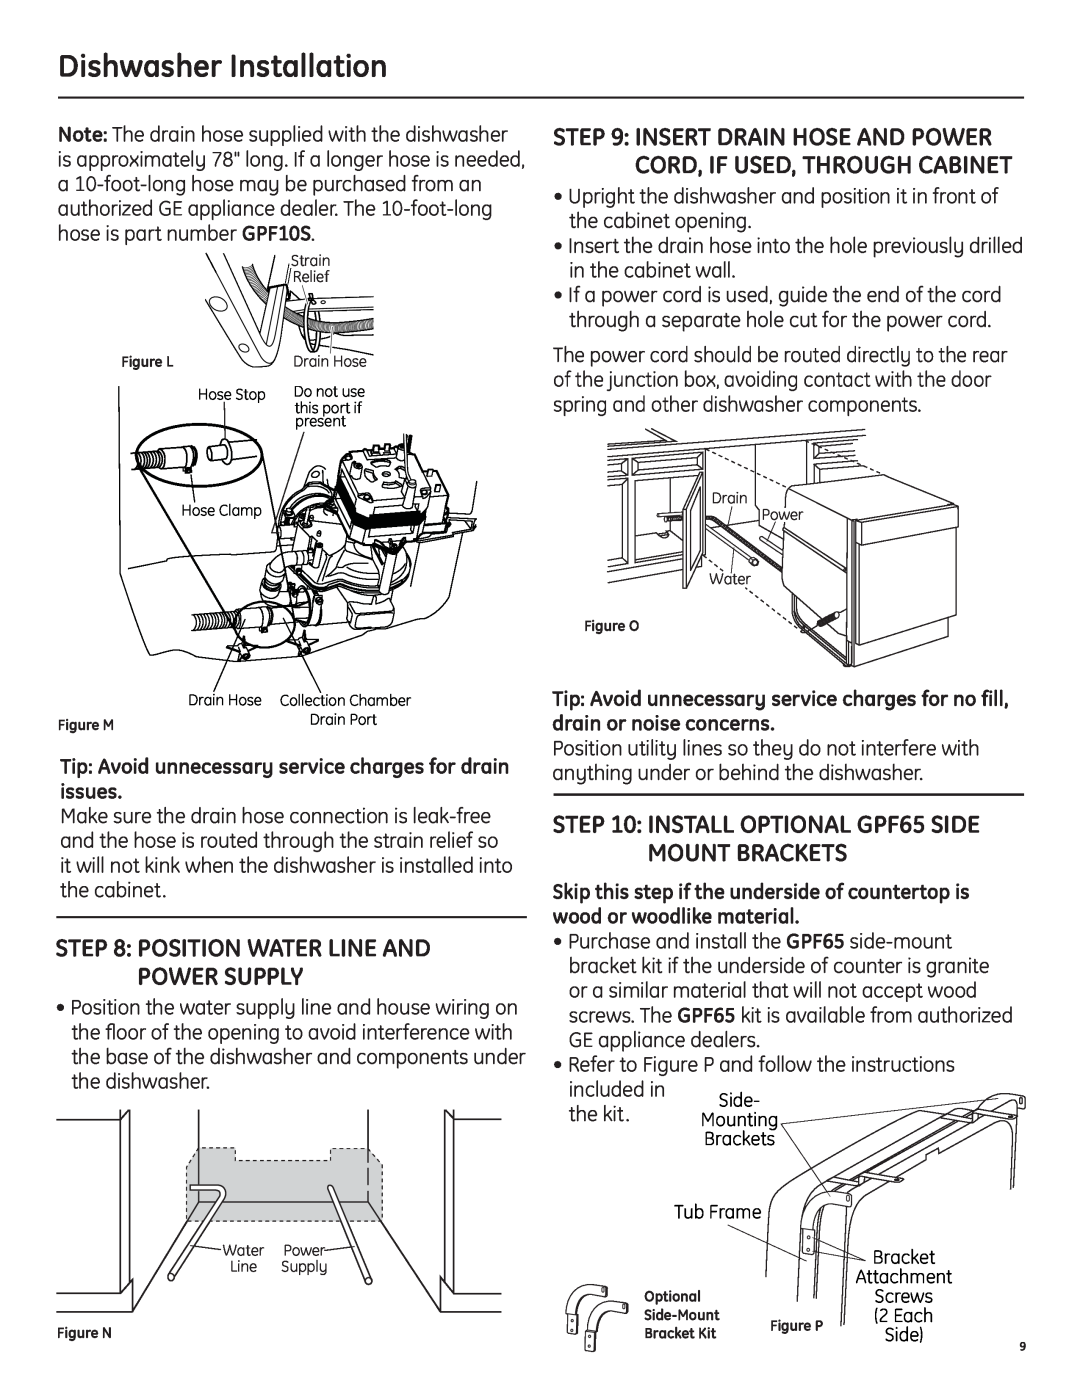 GE 206C1559P195 installation instructions Position Water Line And Power Supply, Dishwasher Installation 